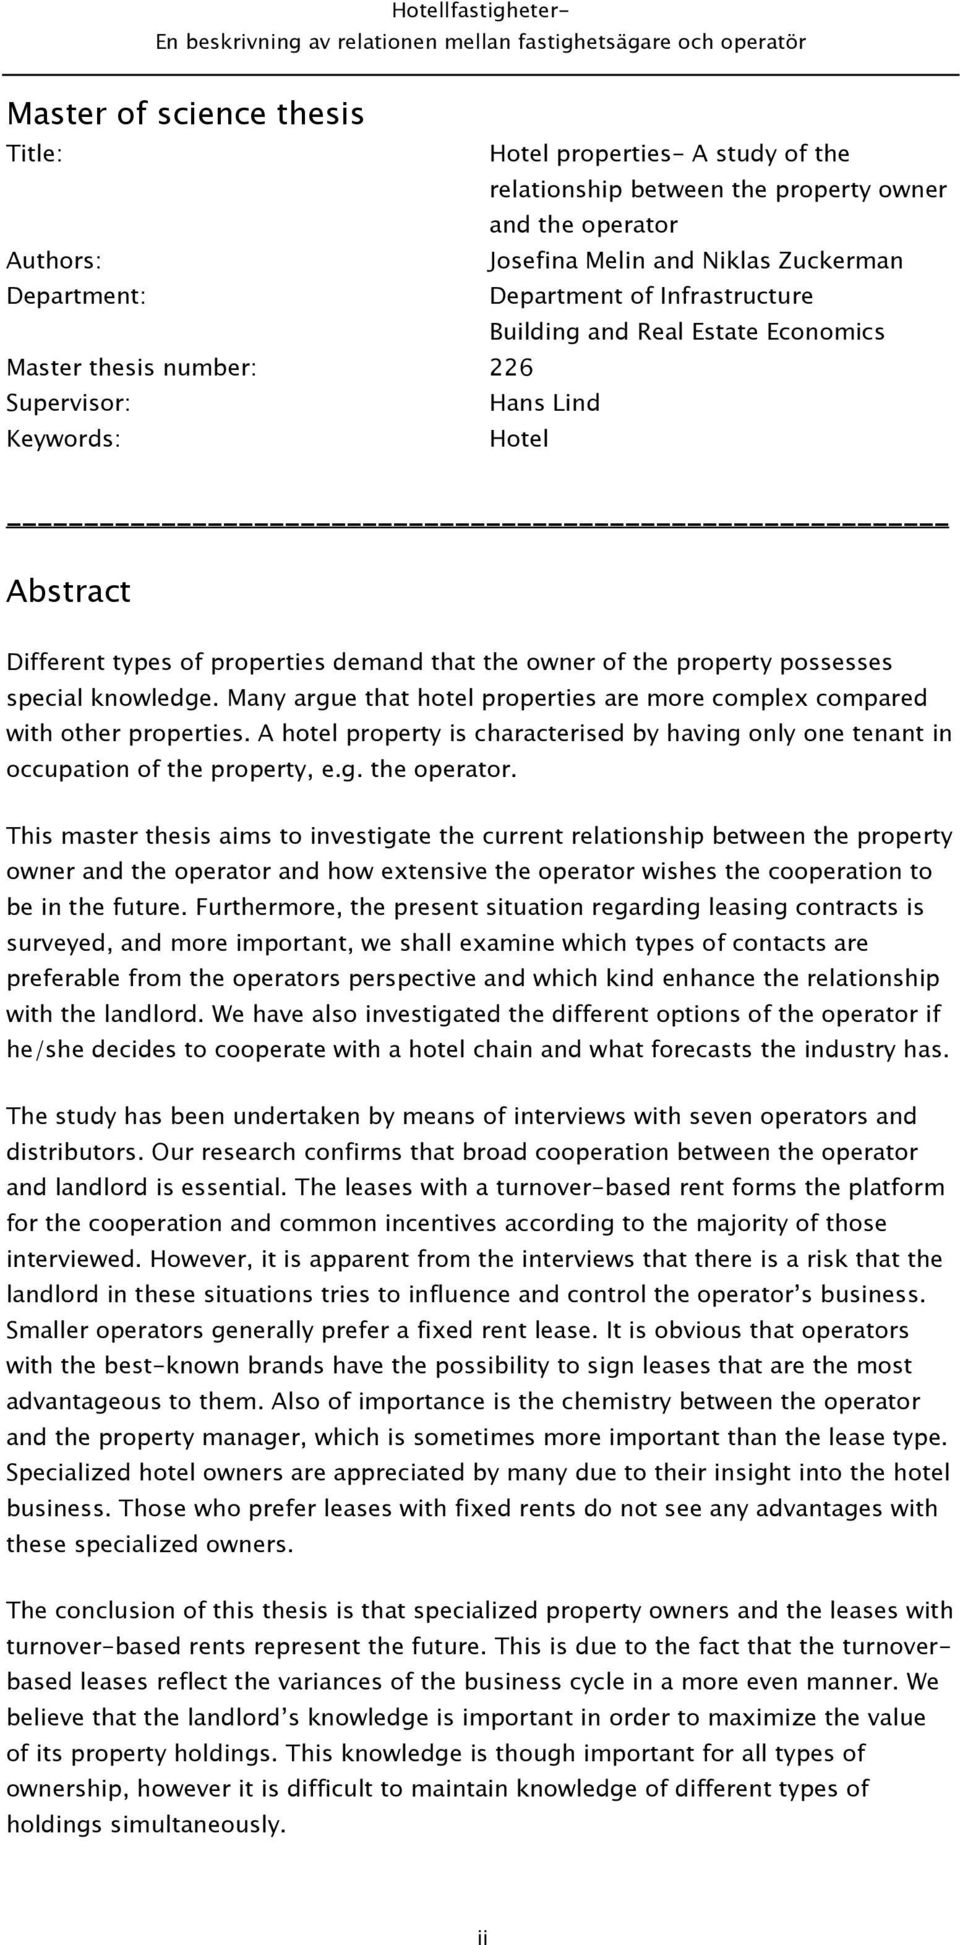 possesses special knowledge. Many argue that hotel properties are more complex compared with other properties.